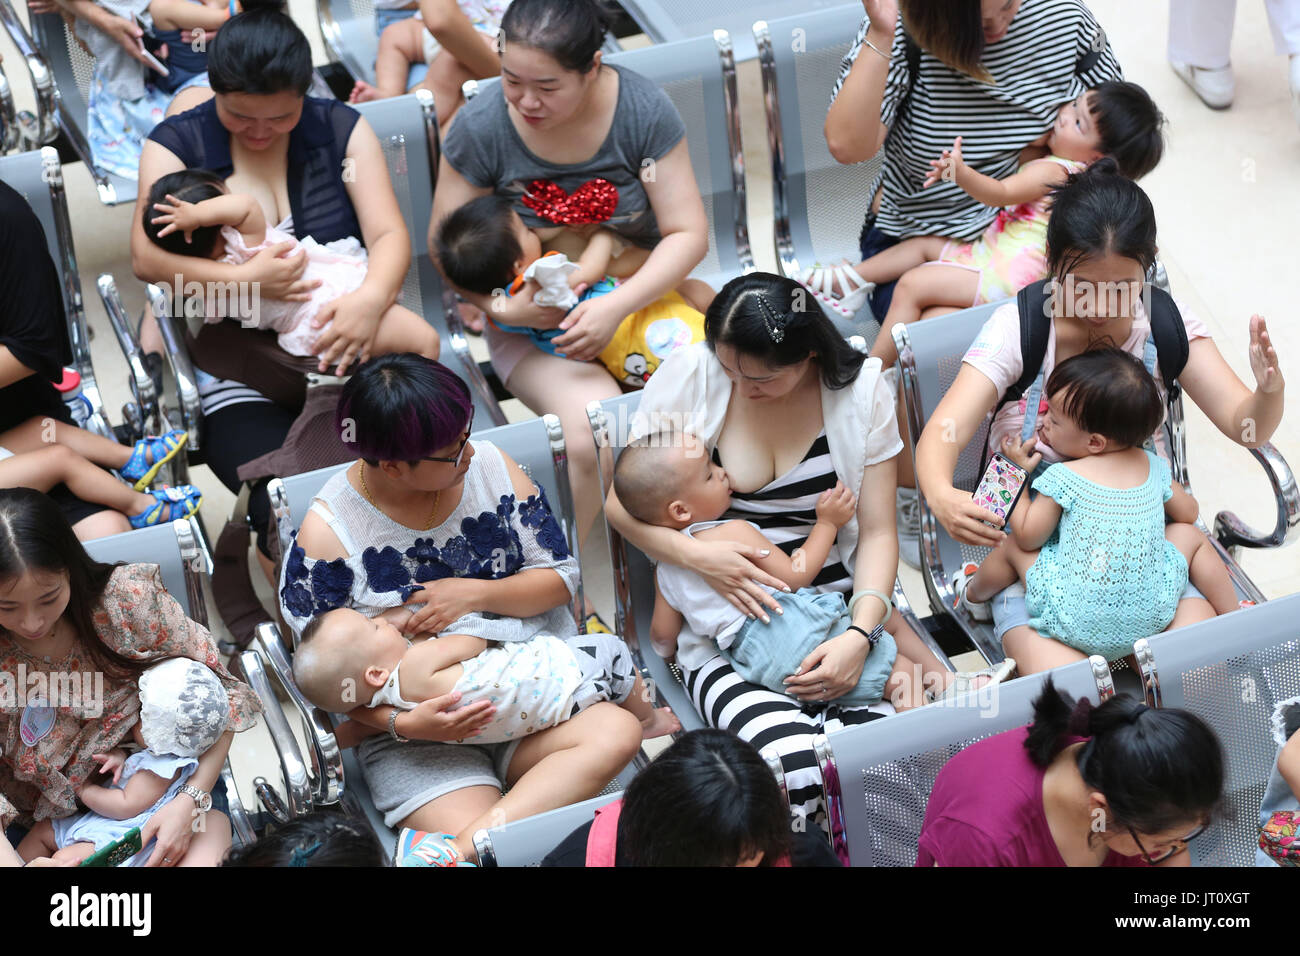 August 5, 2017 - Shenyang, Shenyang, China - Shenyang, CHINA-August 5 2017: (EDITORIAL USE ONLY. CHINA OUT) ..More than 50 women breastfeed their babies during a flash mob activity in Shenyang, northeast China's Liaoning Province, promoting breastfeeding during the World Breastfeeding Week. (Credit Image: © SIPA Asia via ZUMA Wire) Stock Photo